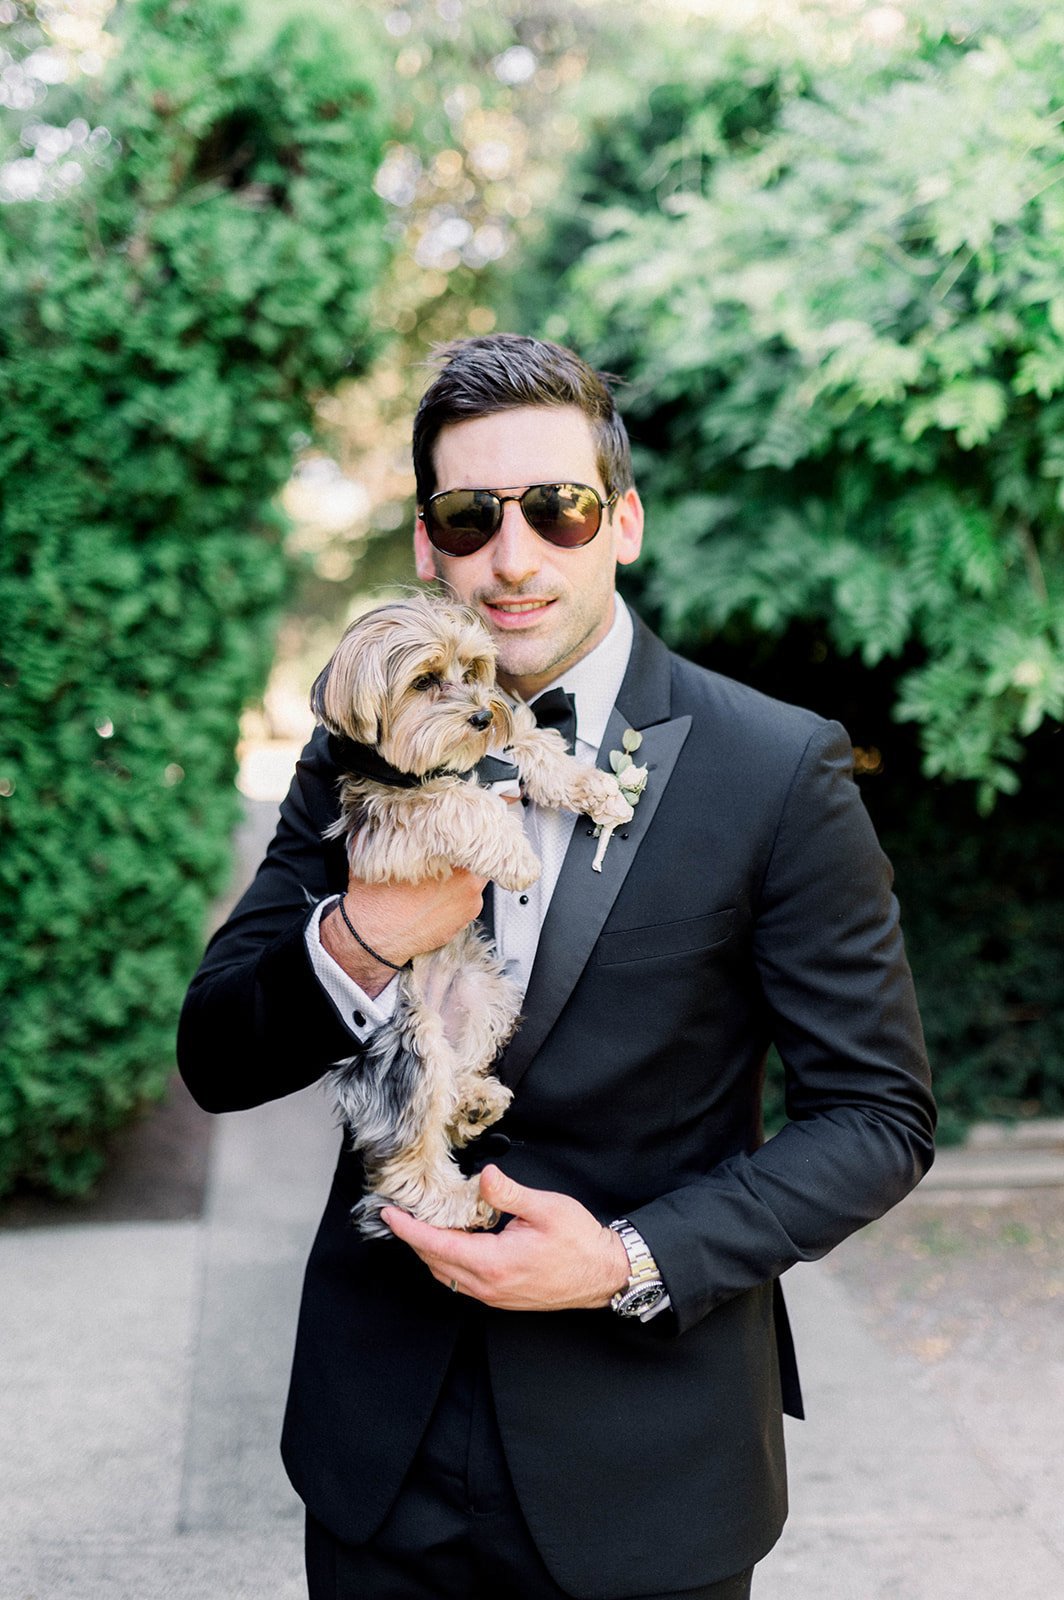 Cool looking groom cuddles Yorkie pup in matching suit at heart house wedding in Vancouver BC.